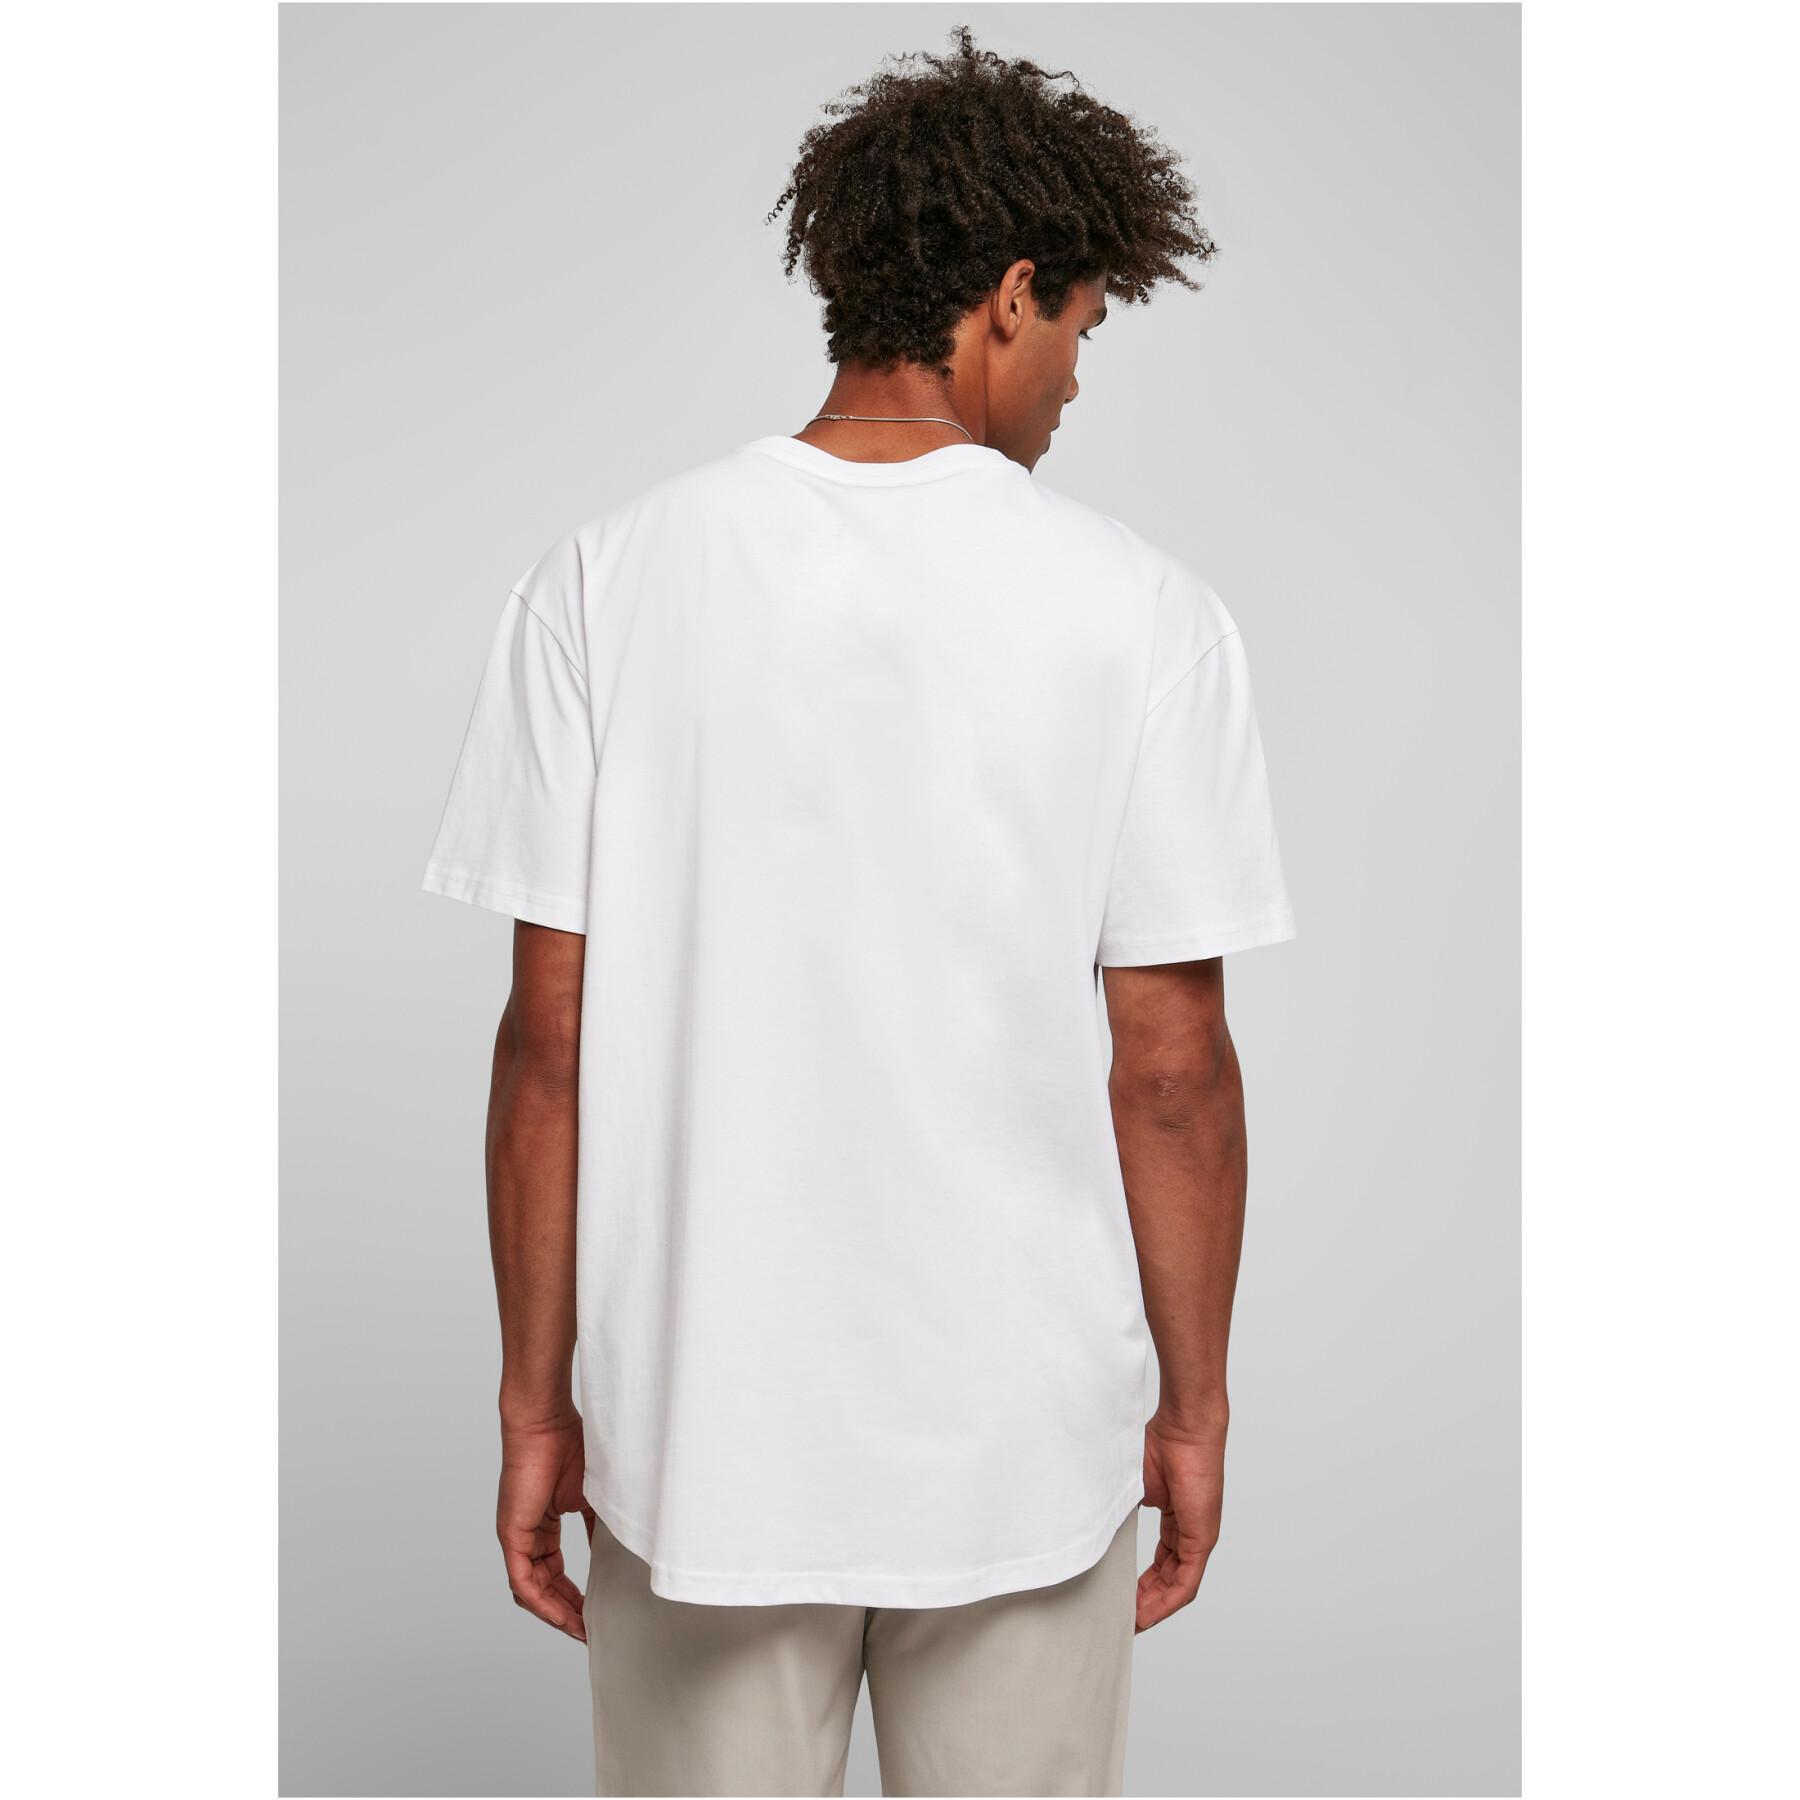 Camiseta Urban Classics Recycled Curved Shoulder